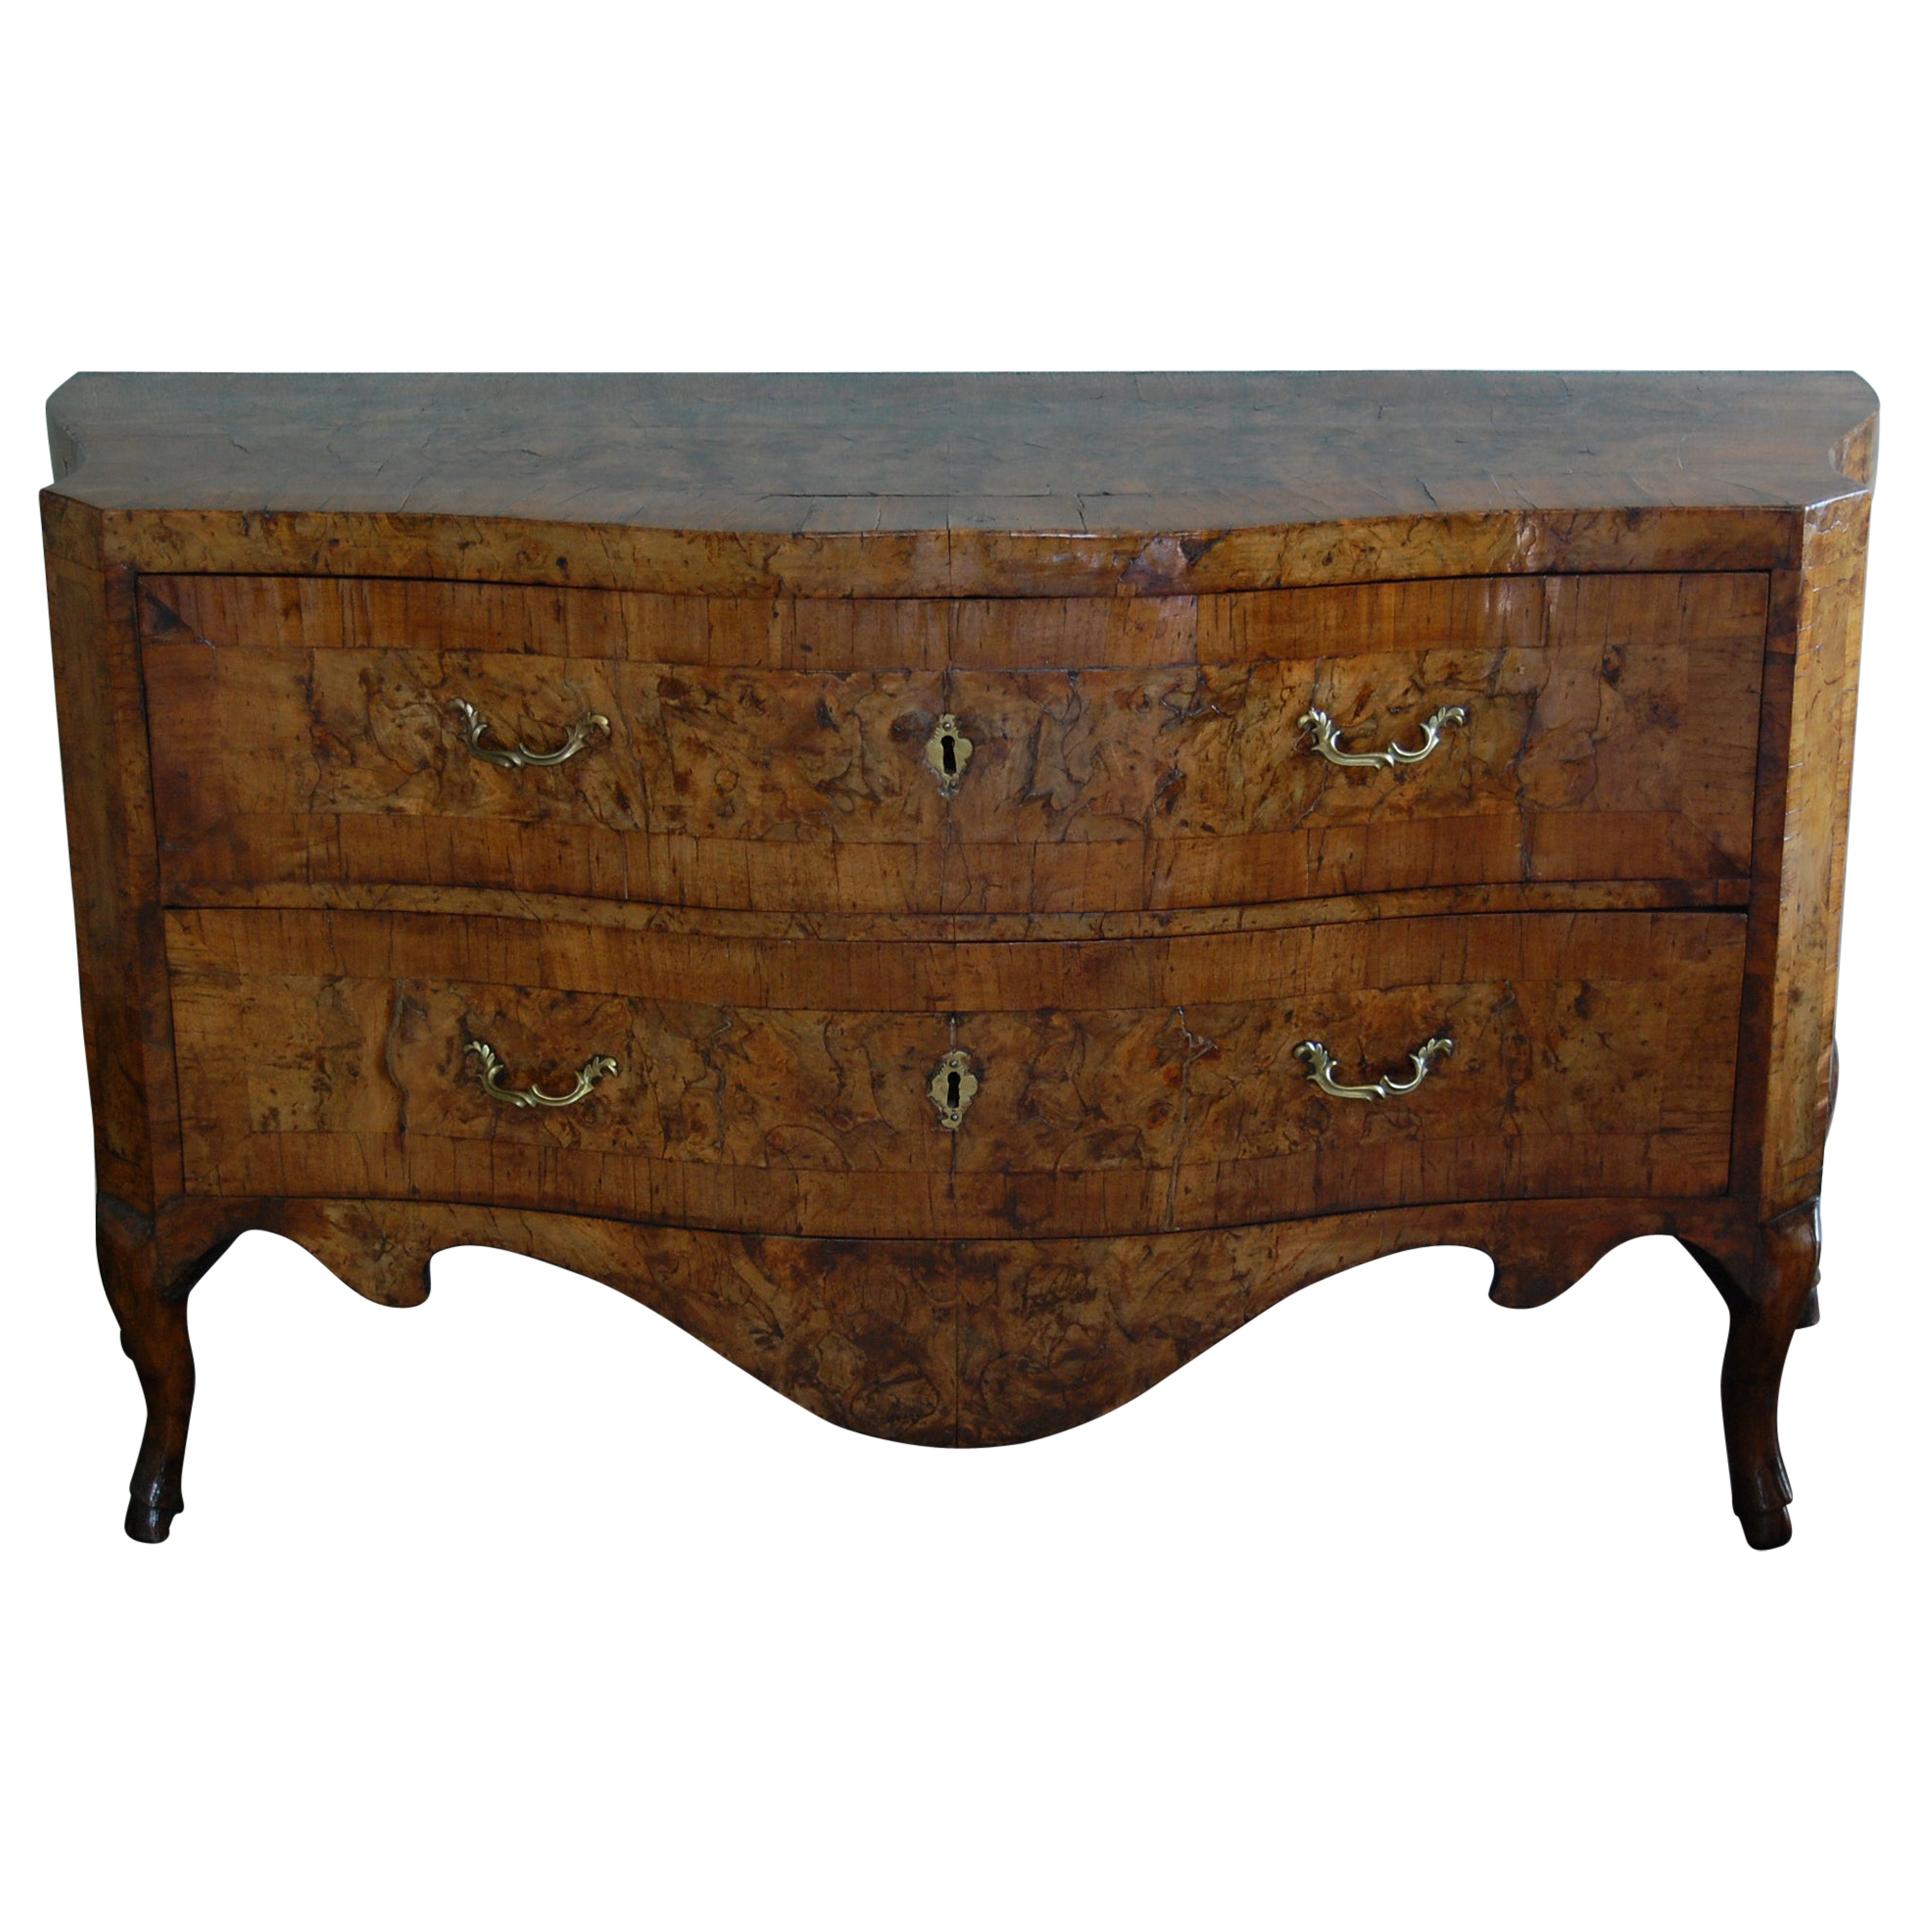 Inlaid Serpentine Italian Olive Wood Two-Drawer Commode, Mid-18th Century For Sale